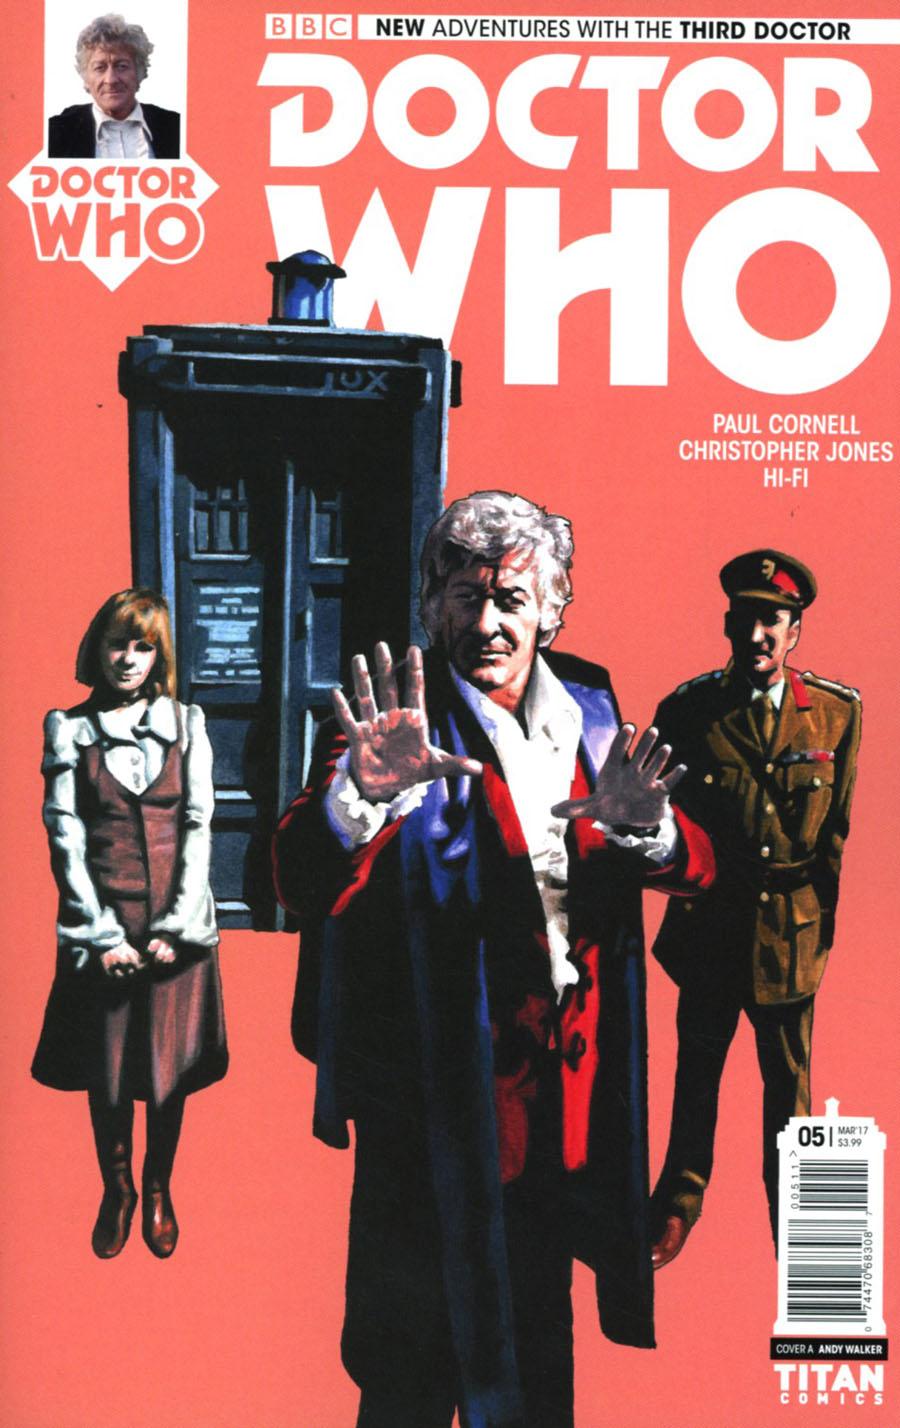 Doctor Who 3rd Doctor Vol. 1 #5